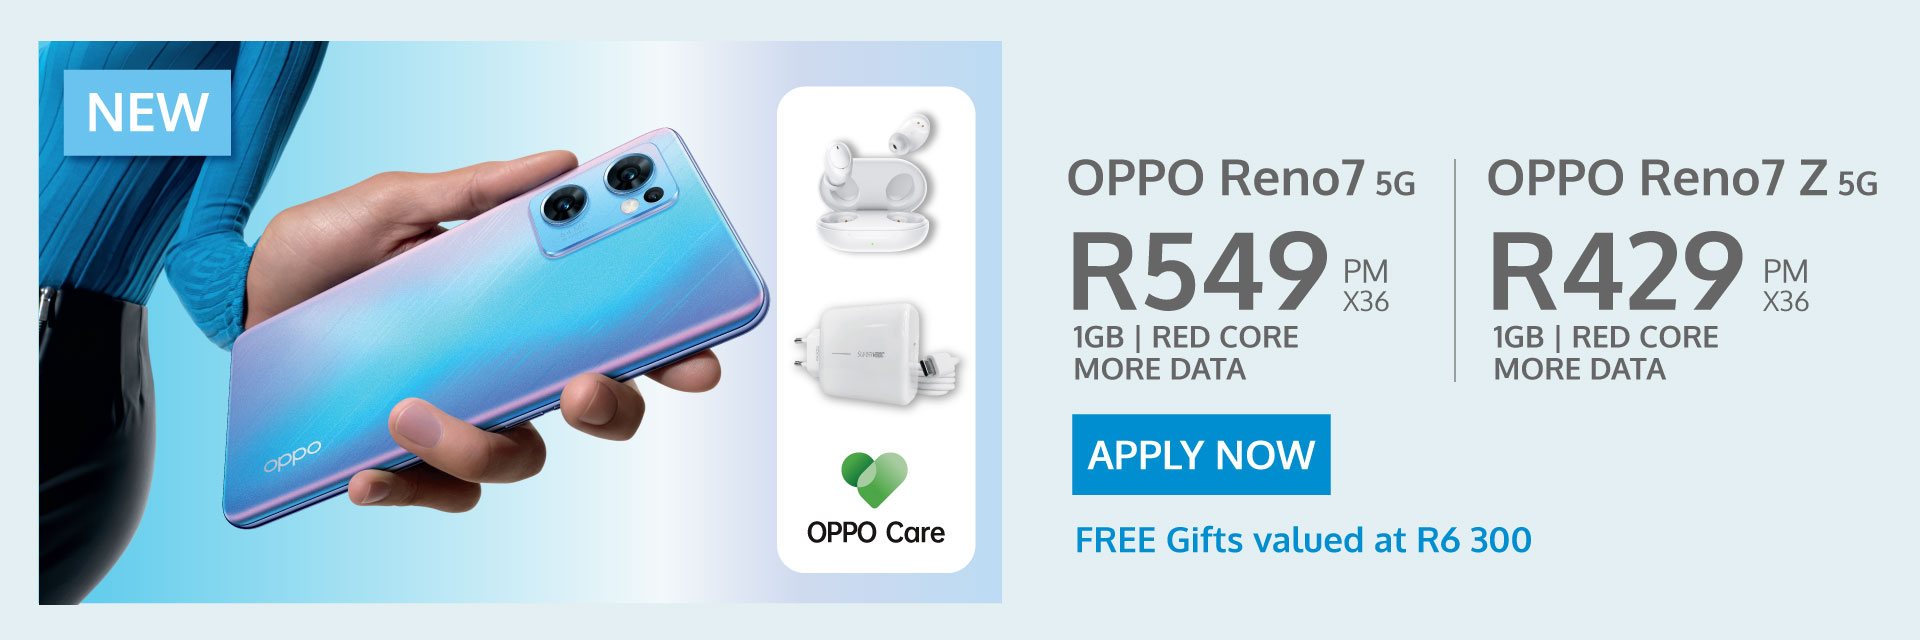 Oppo reno 7 and 7z contract banner